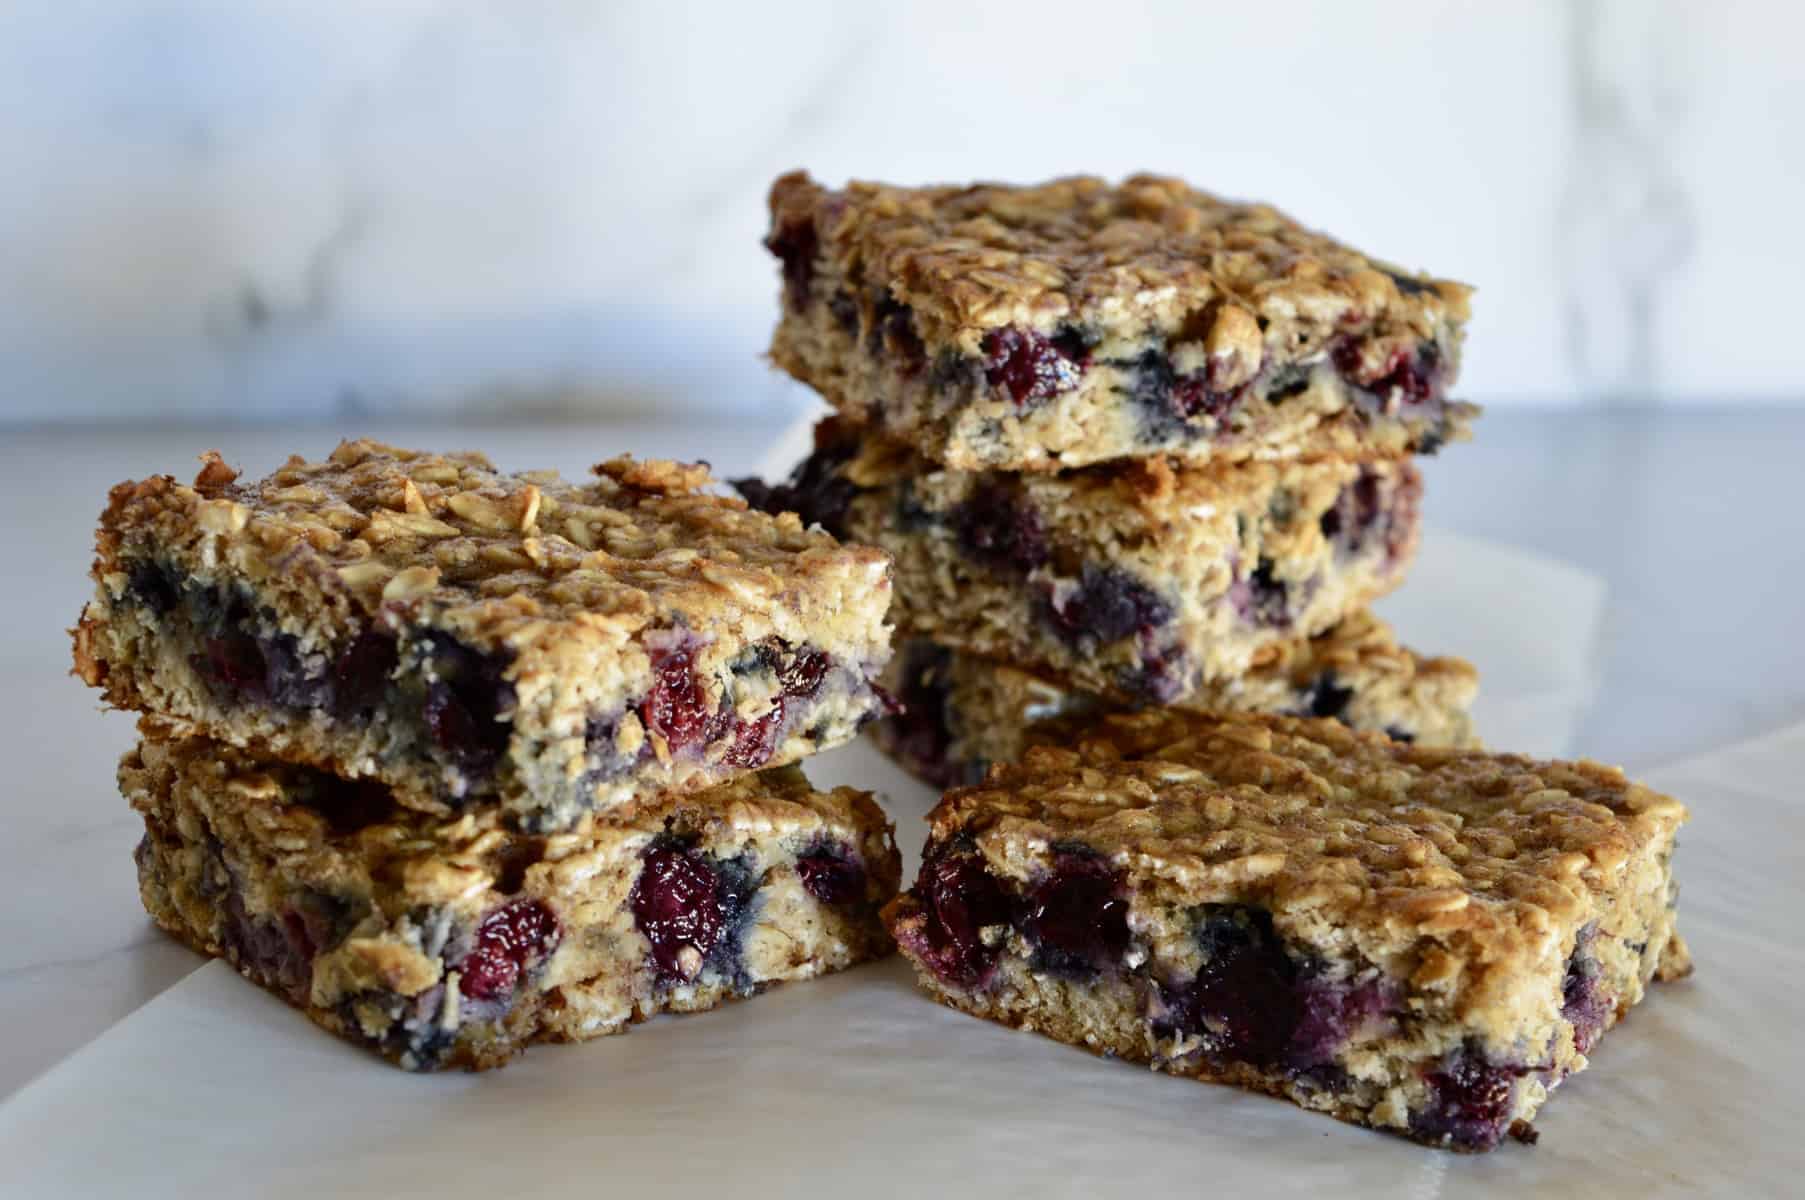 Blueberry Banana Oat Bars stacked on each other on a white background